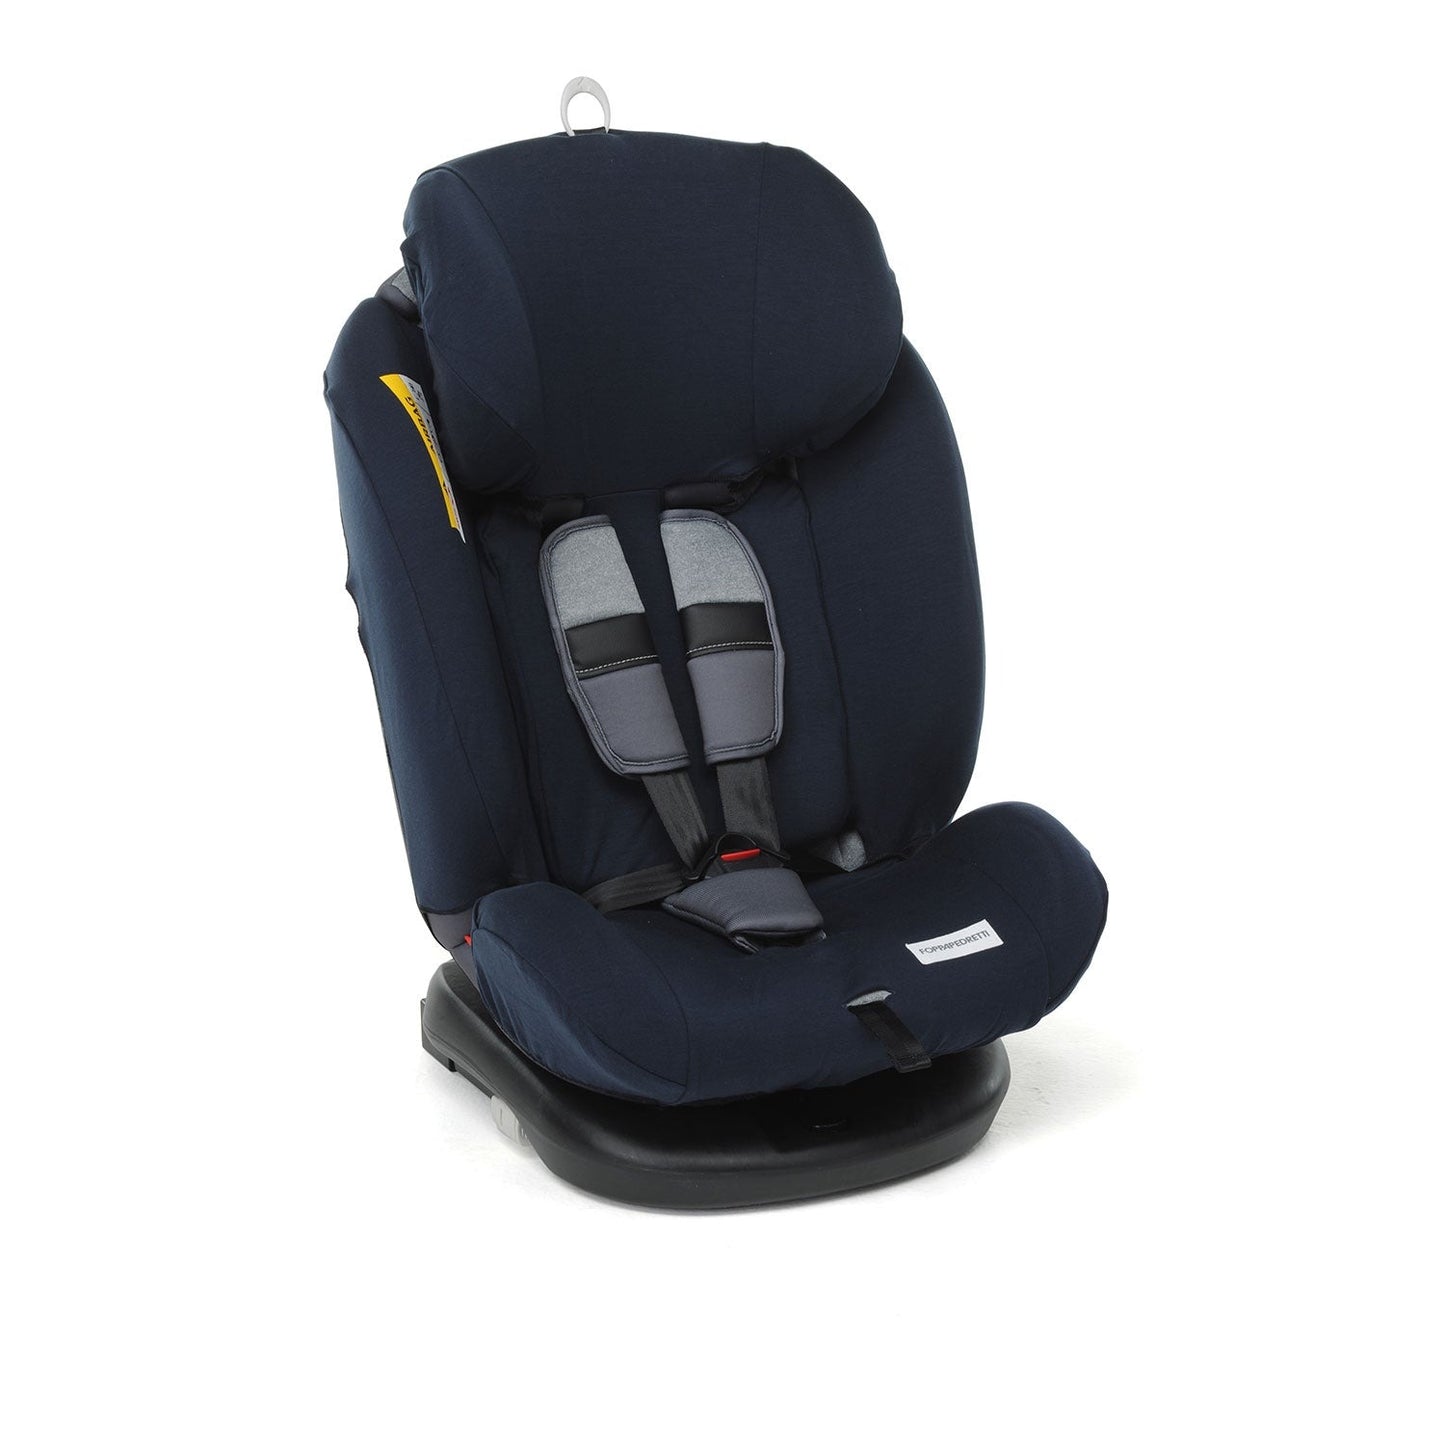 Foppapedretti - Summer Cover for Iturn duoFIX car seat